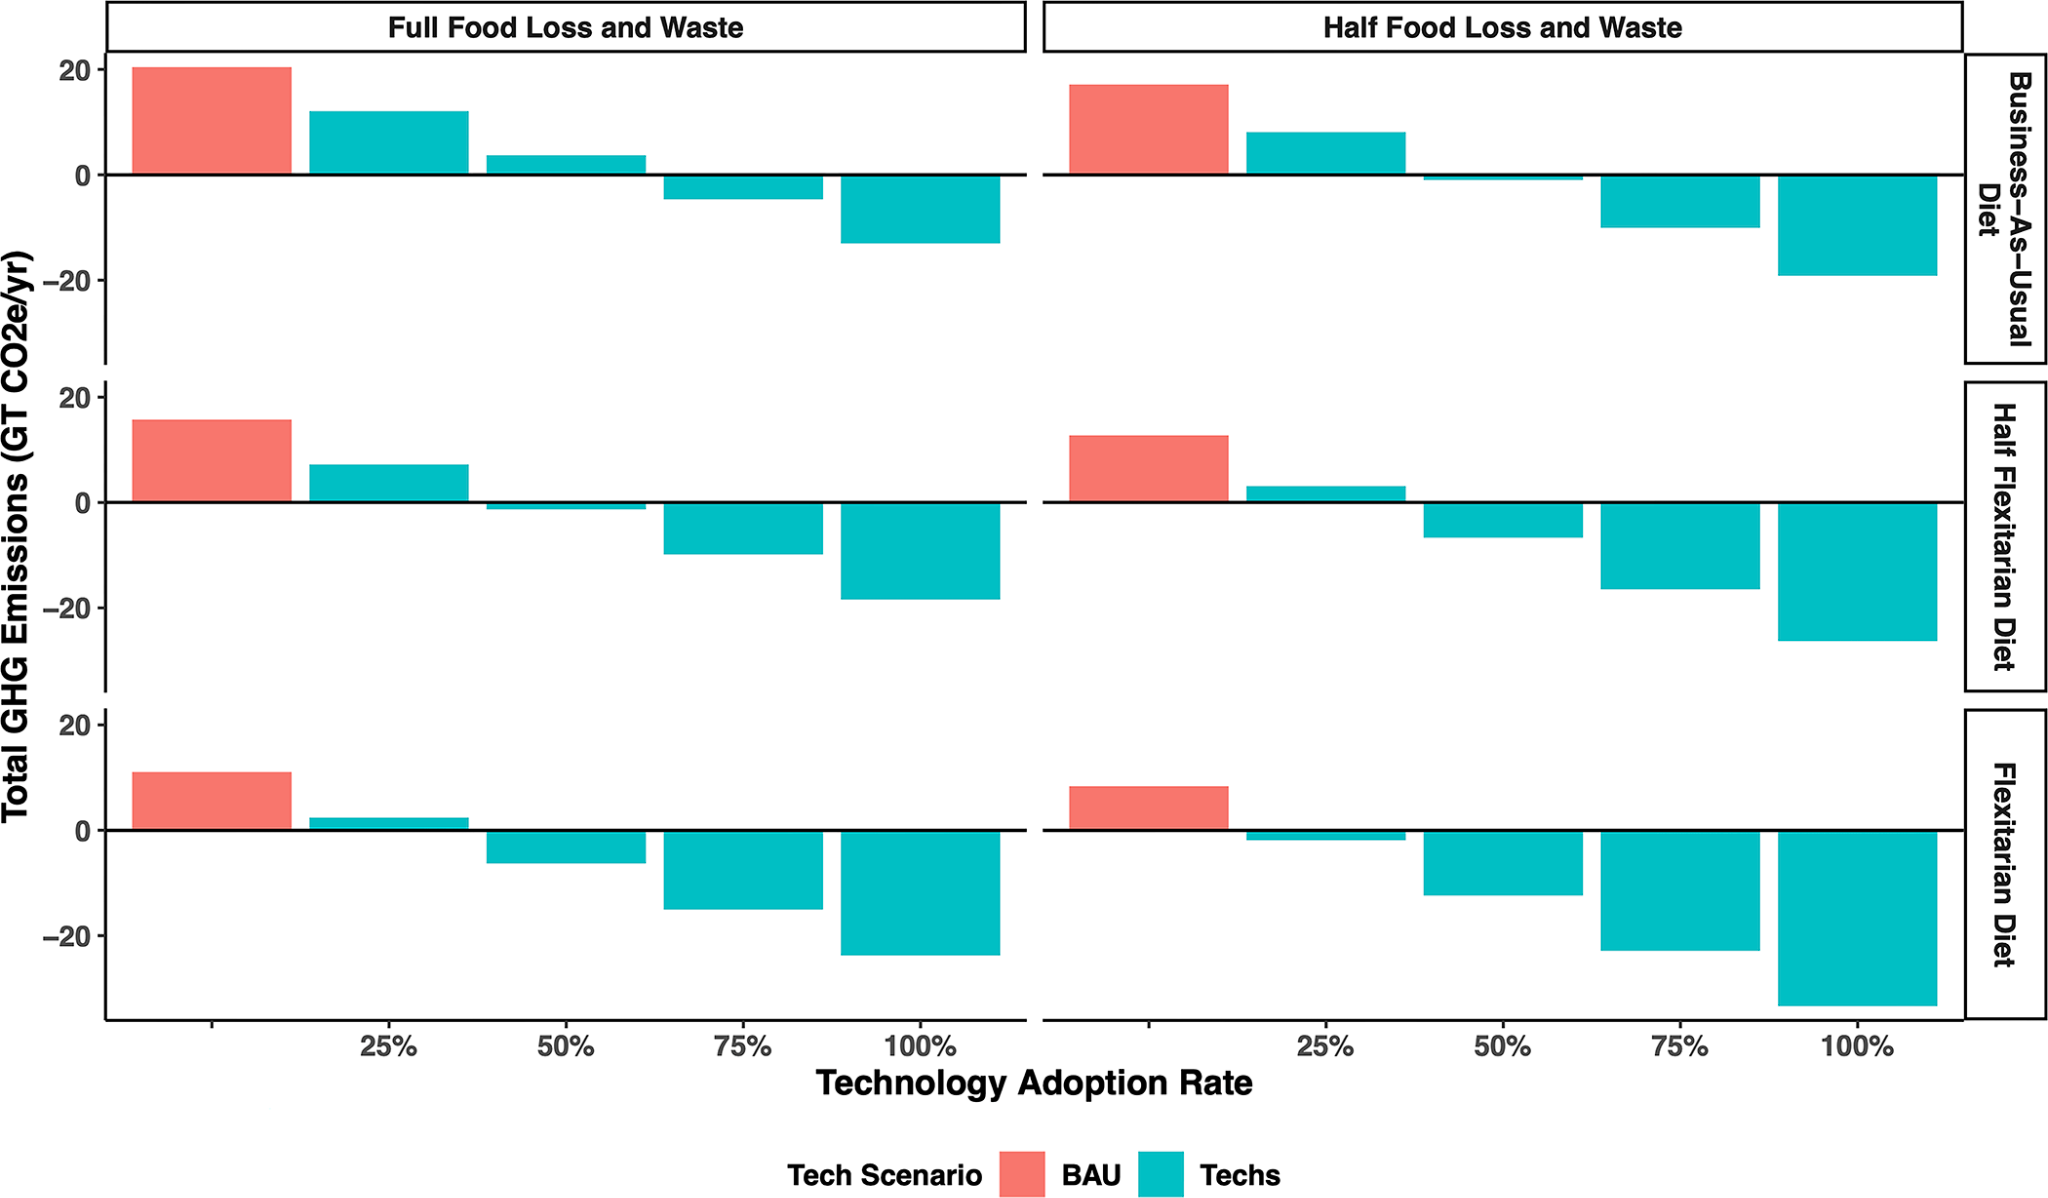 Figure 2: Net food sector GHG emissions from technology adoption scenarios (0%, 25%, 50%, 75% and 100% adoption) across global dietary transitions from business as usual (top) to 50% (middle) to 100% flexitarian adoption (bottom) with (right) and without (left) reductions in food loss and waste in 2050. All scenarios assume full closure of yield gaps by 2050. Technological adoption rate is based on the global additive effects of all technologies listed in Fig.1. (Fig 2, Almaraz et al., 2023).